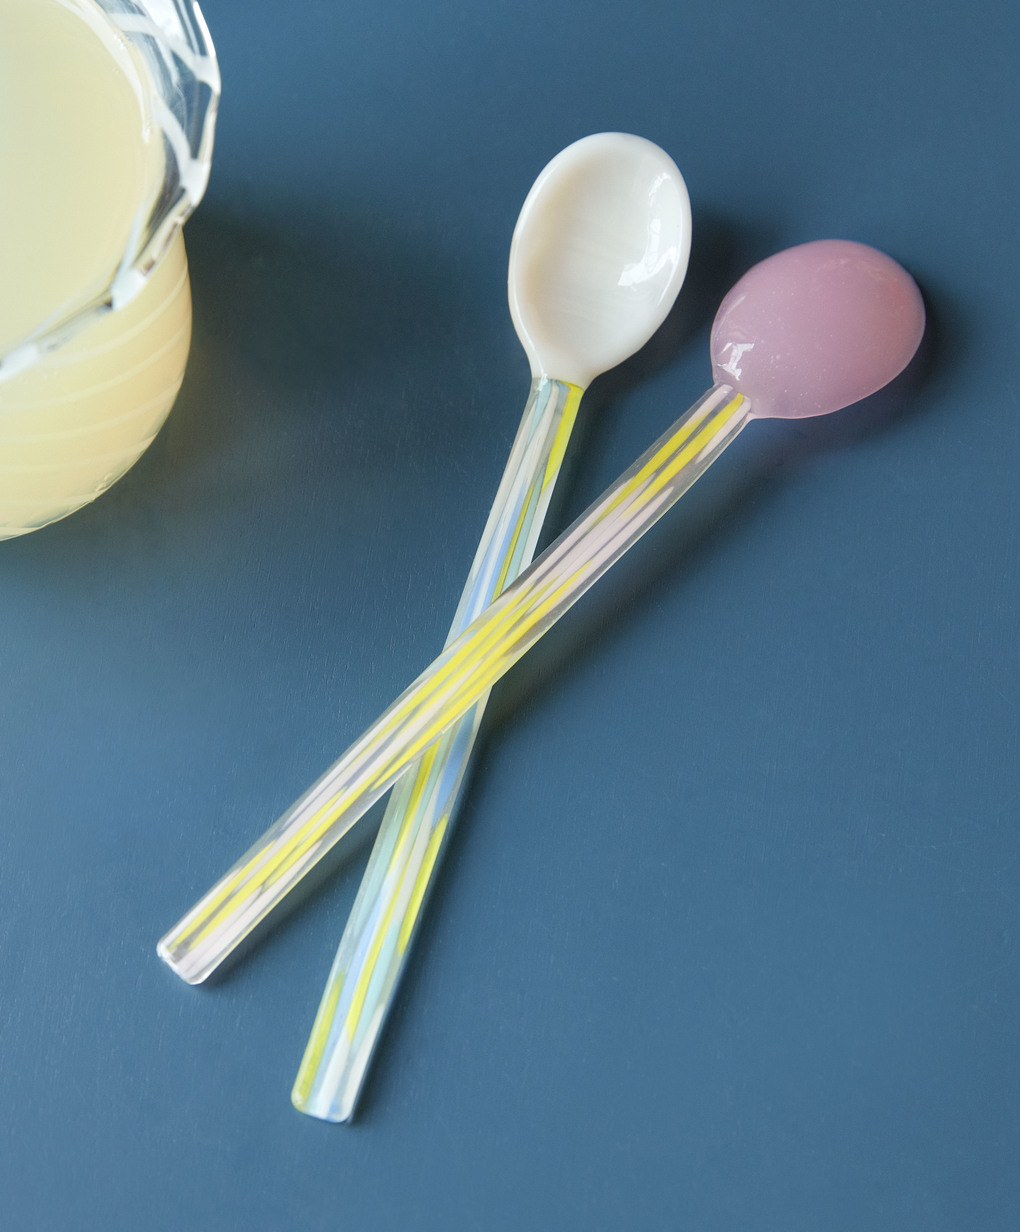 Glass spoons flat 2pcs light pink and white